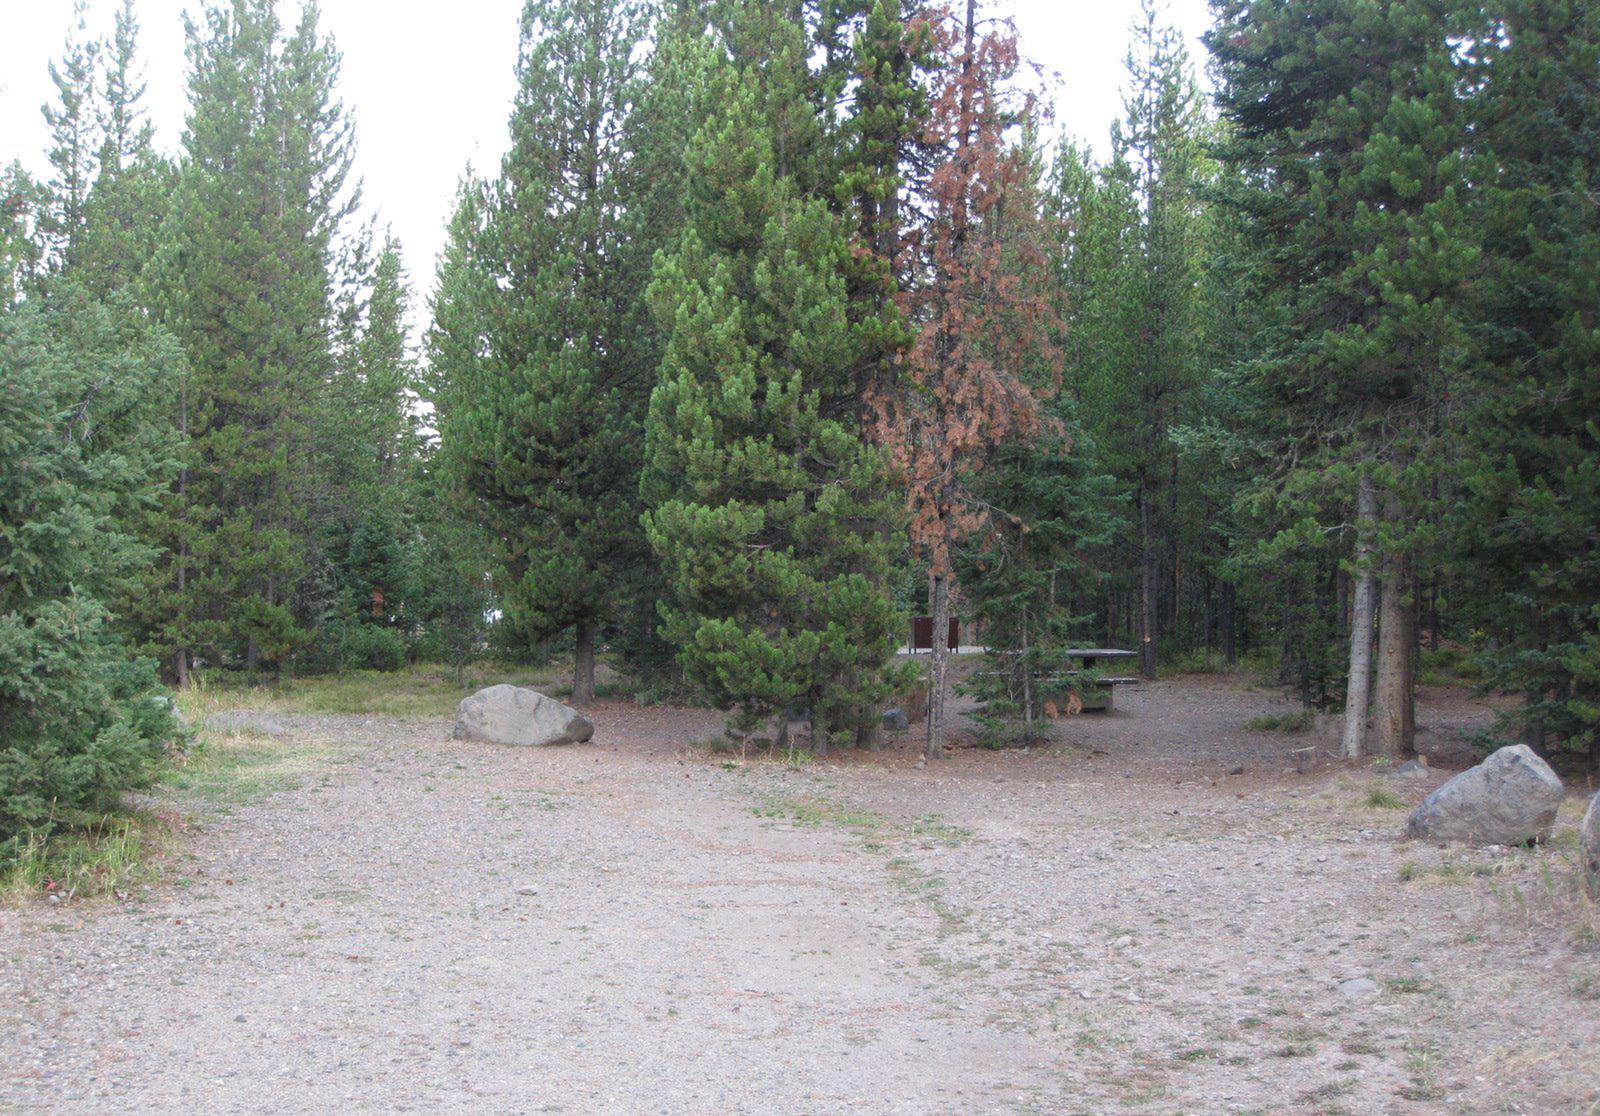 Site 7, campsite surrounded by pine trees, picnic table & fire ringSite 7